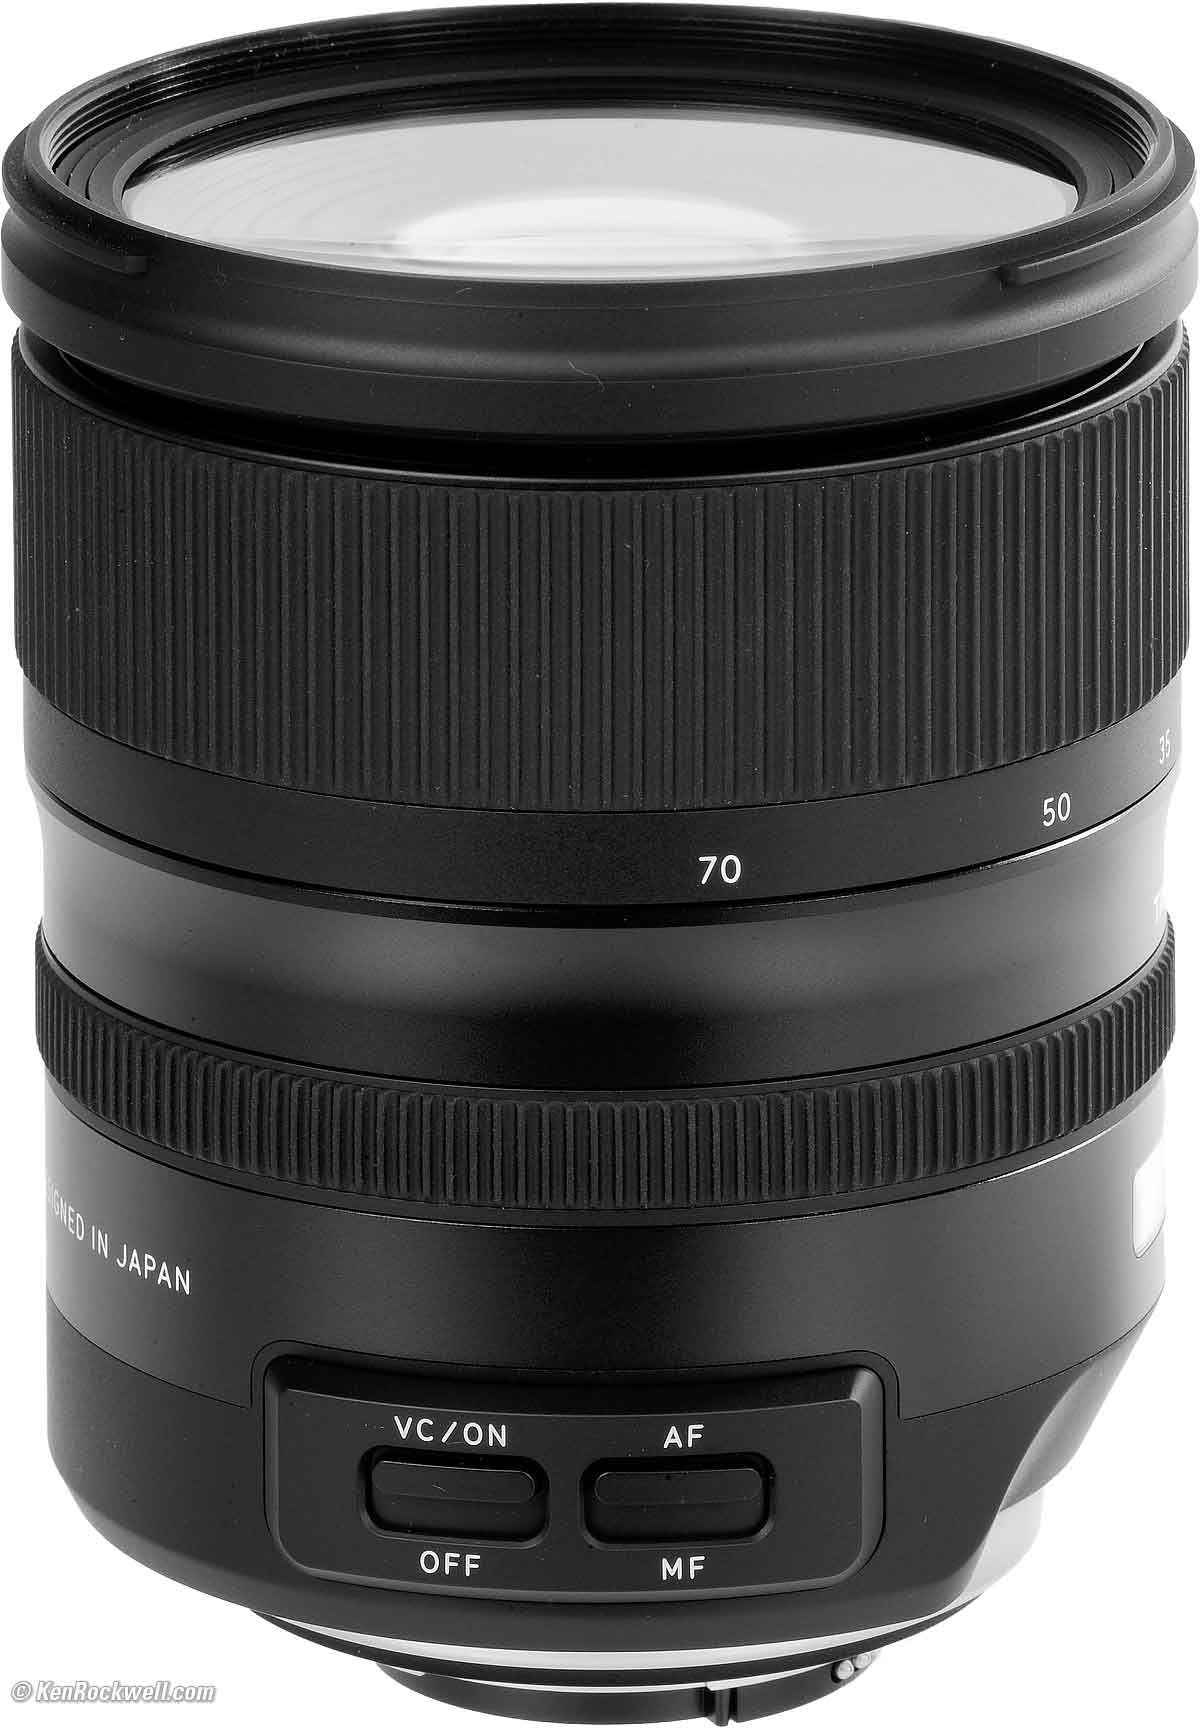 Tamron SP 24-70mm f/2.8 VC G2 Review